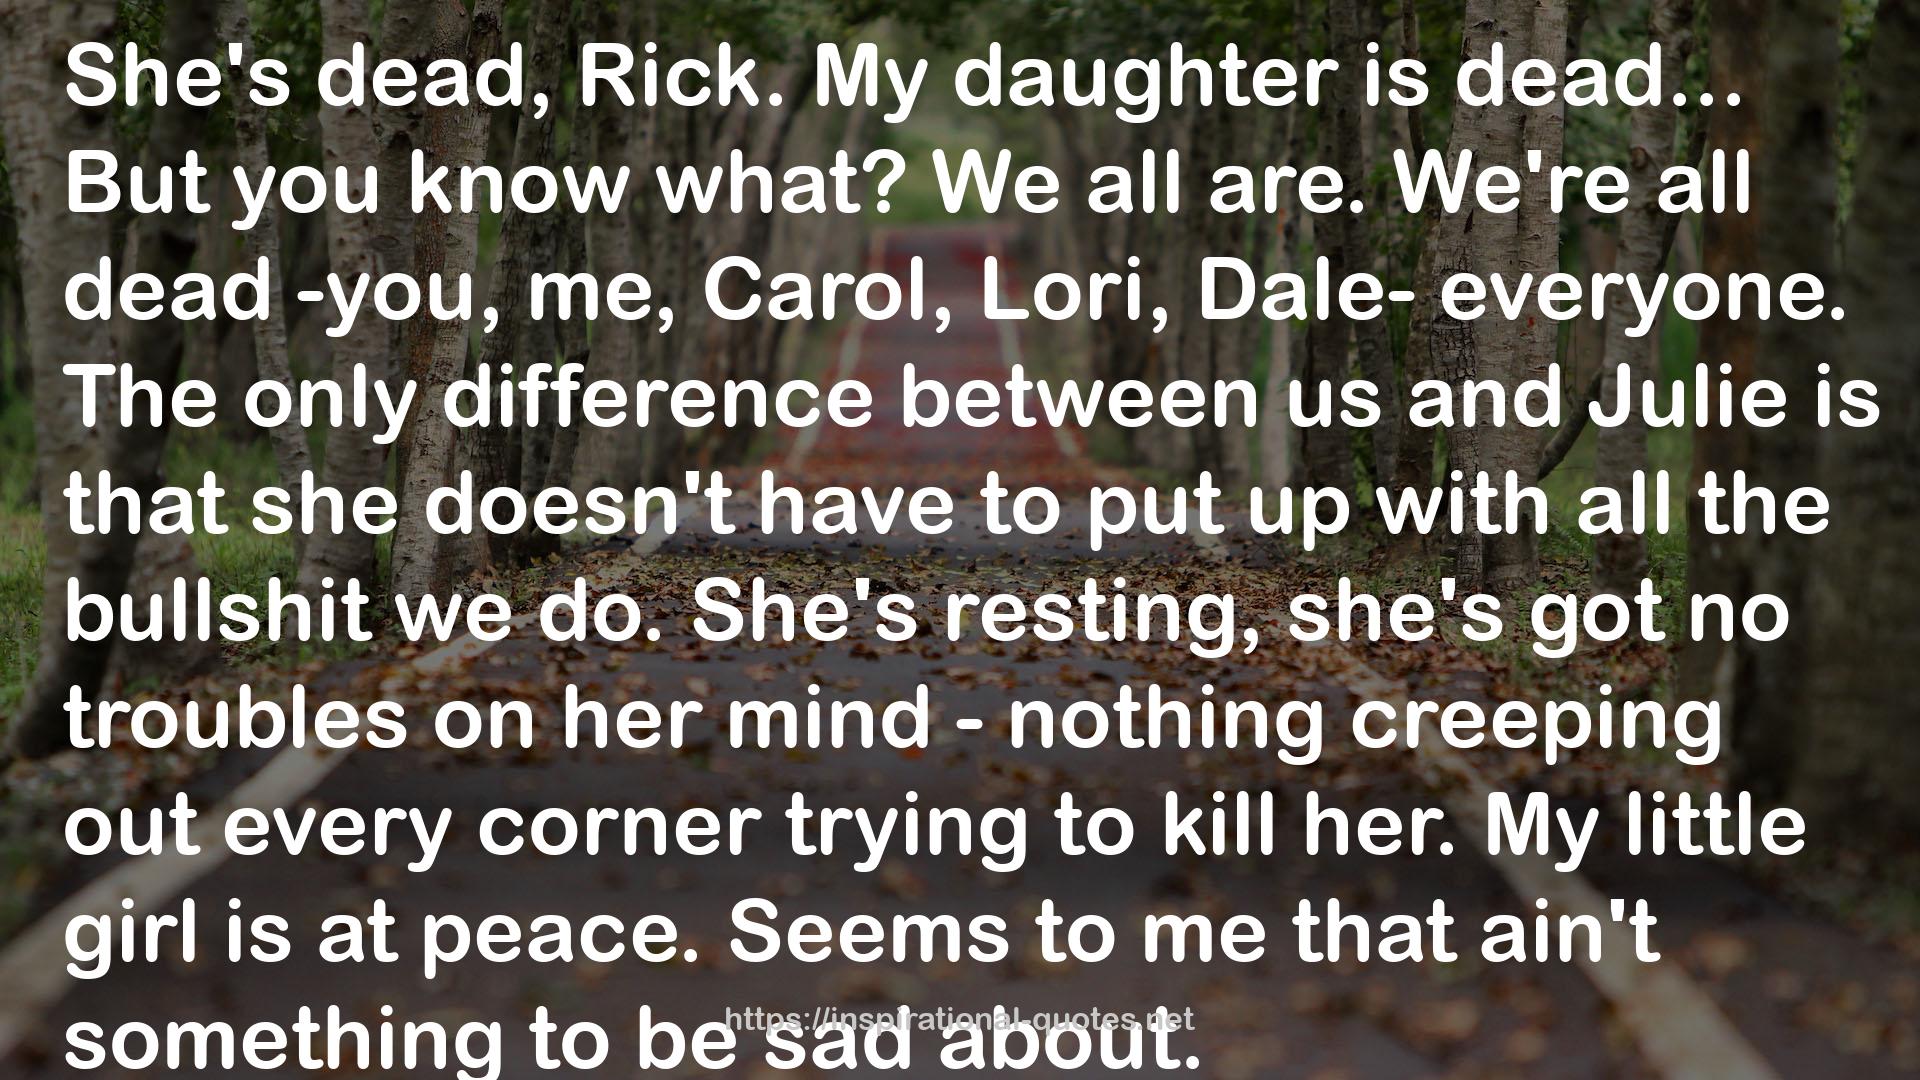 The Walking Dead #16 QUOTES